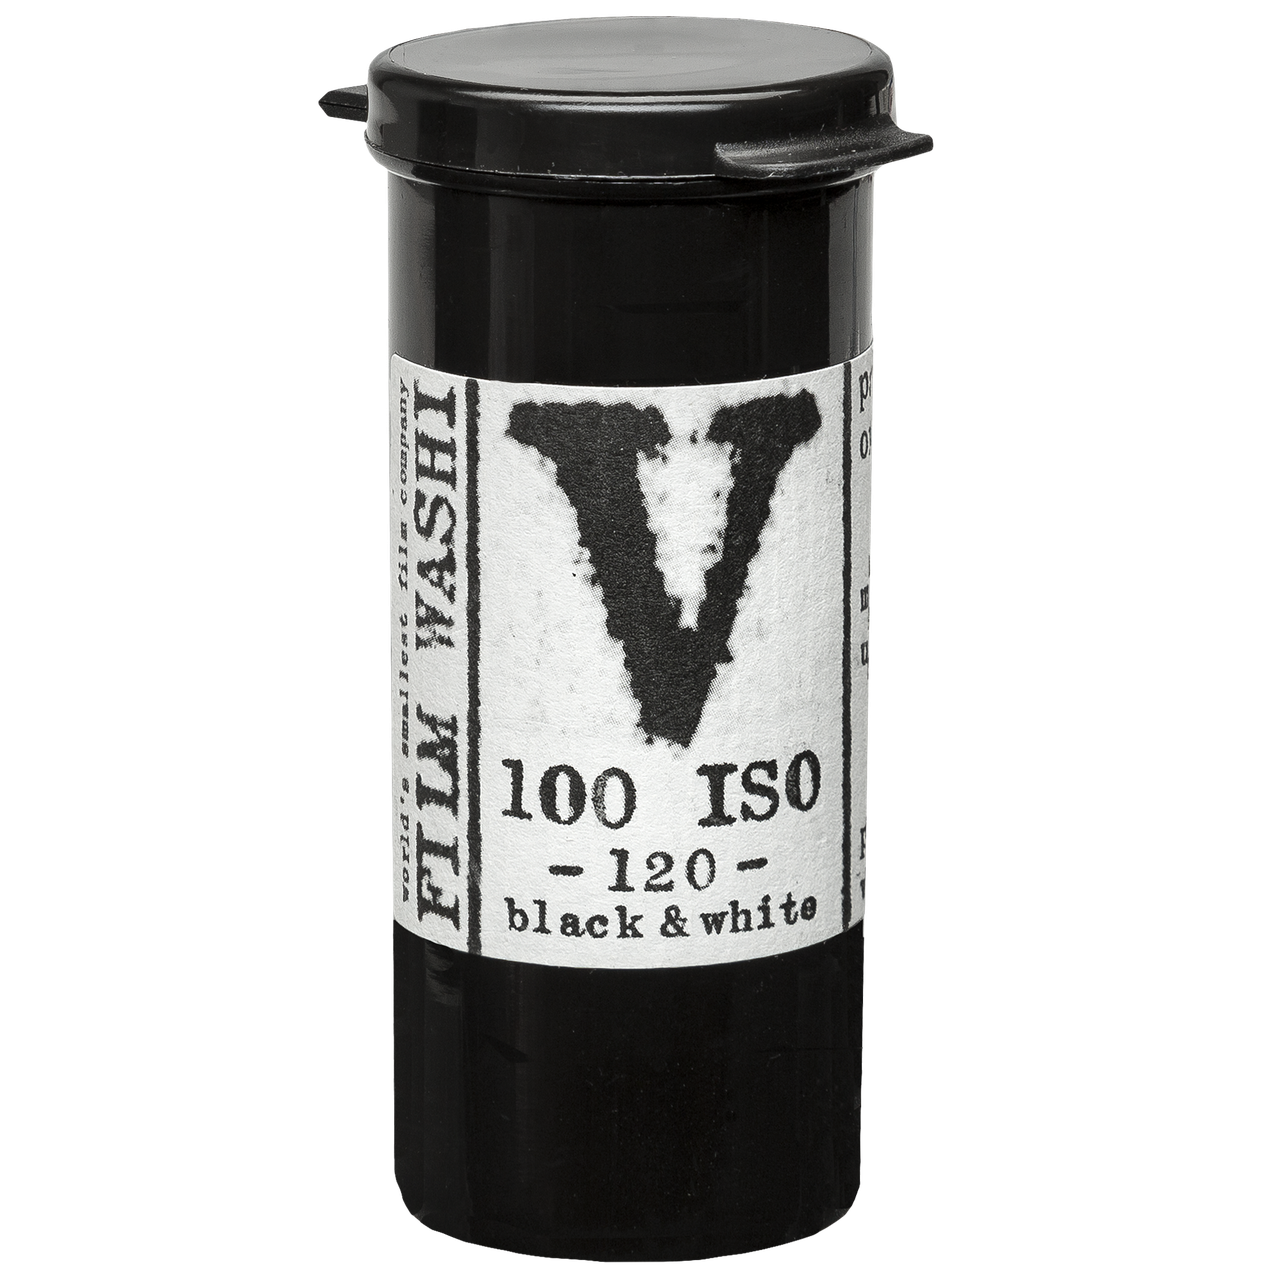 WASHI Film "V" - 100 iso - ortho Format 120 Rollfilm - Pre-order now (available from approx 15.03.2022)